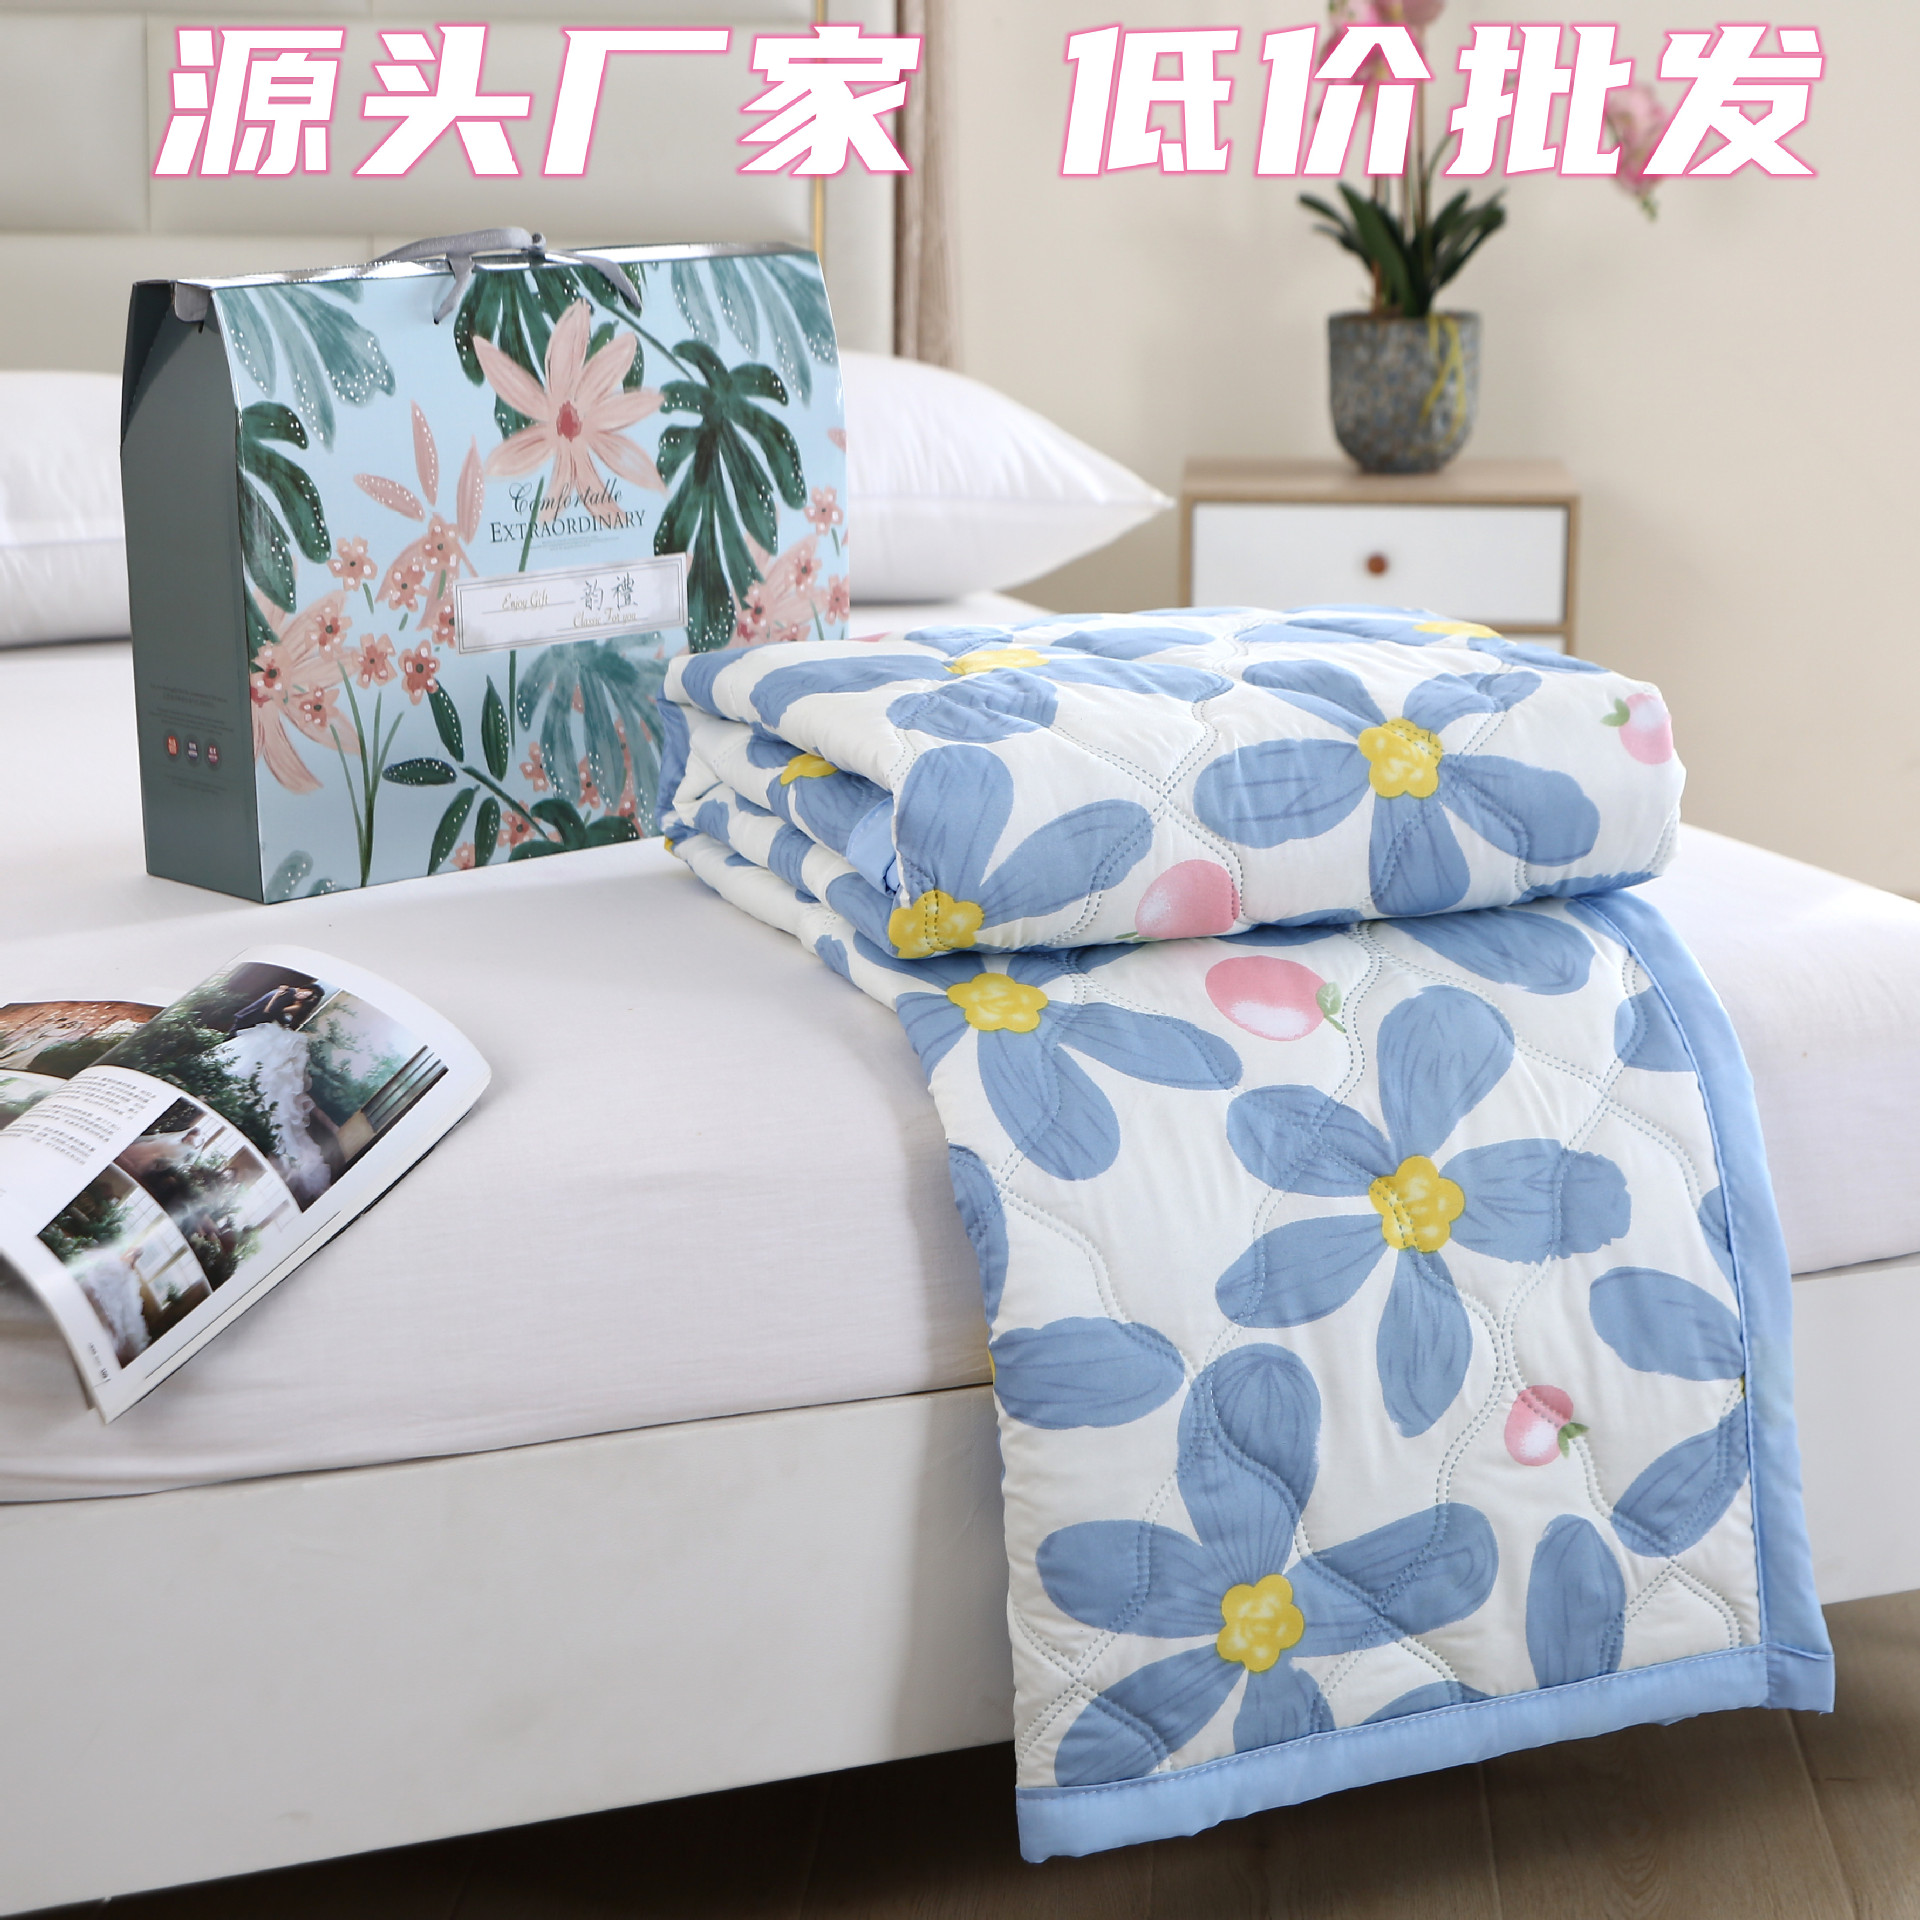 Summer Quilt Air Conditioning Quilt Washed Cotton Summer Cool Quilt Company Will Sell Store Celebration Gifts Summer Quilt Thin Quilt Quilt Core Factory Wholesale